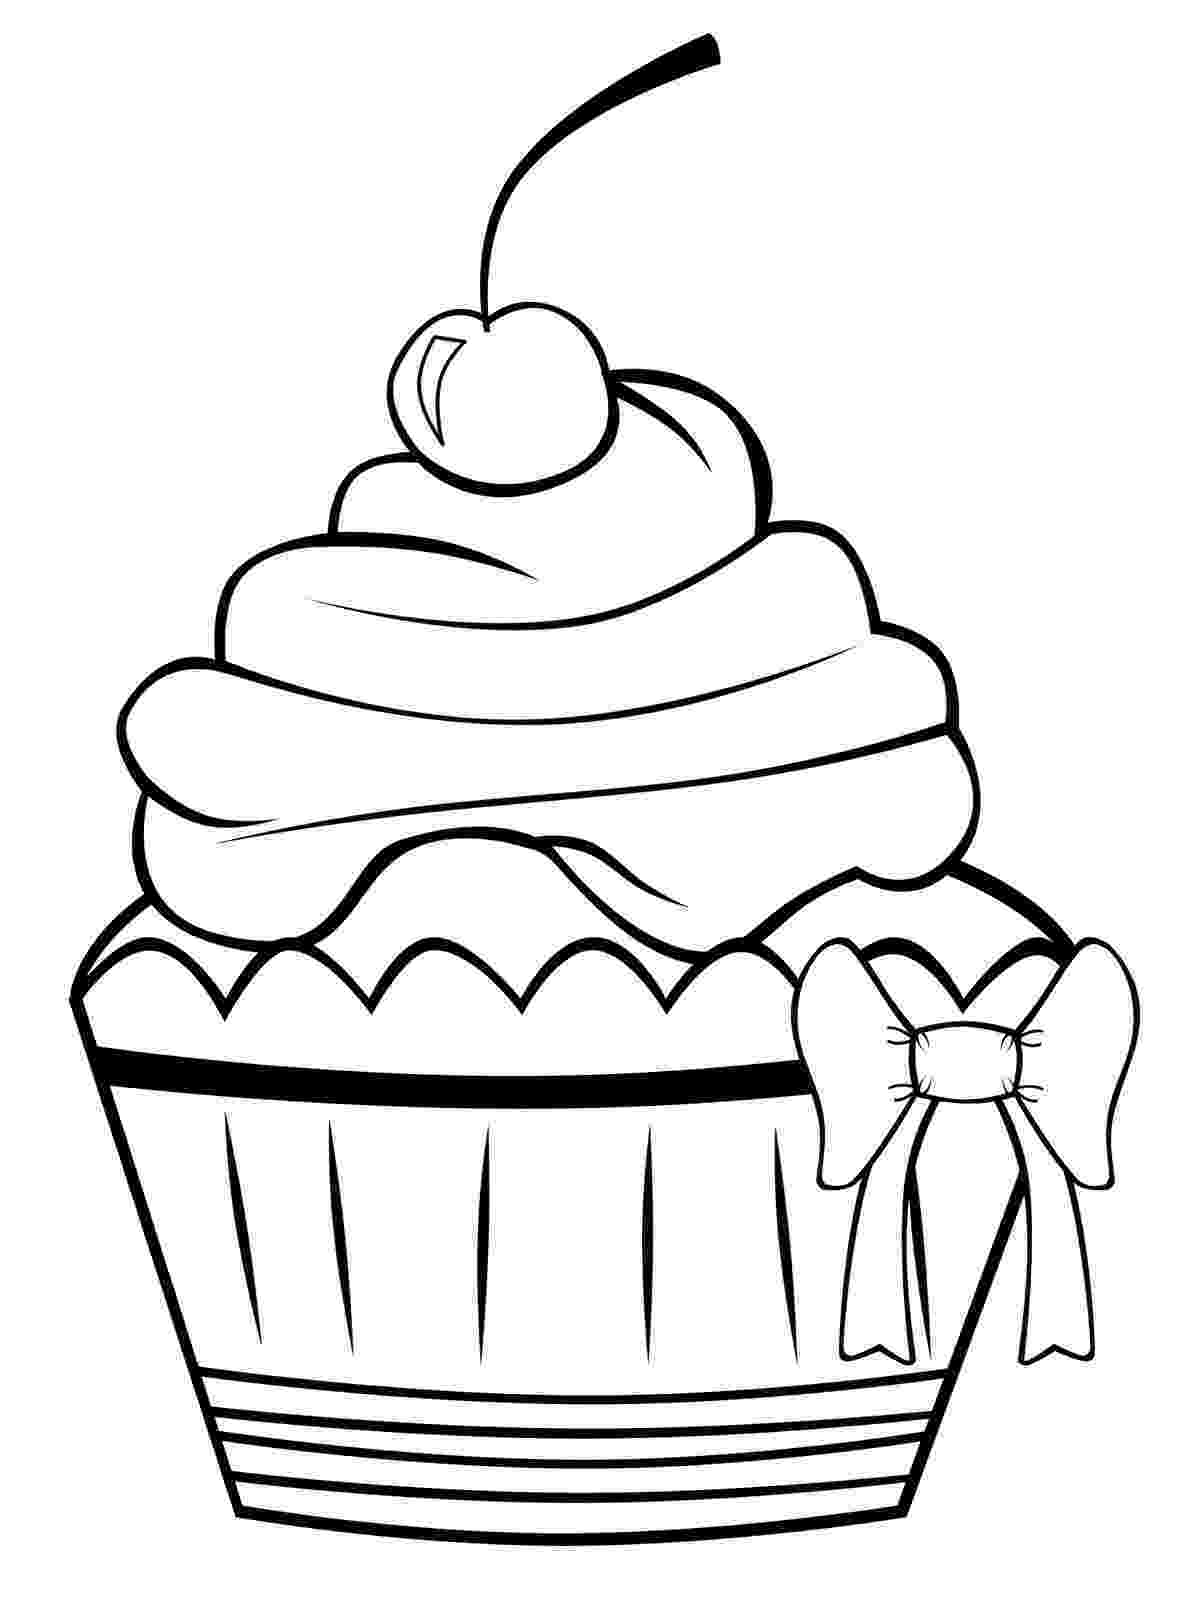 colouring picture cake birthday cake coloring pages birthday coloring pages colouring picture cake 